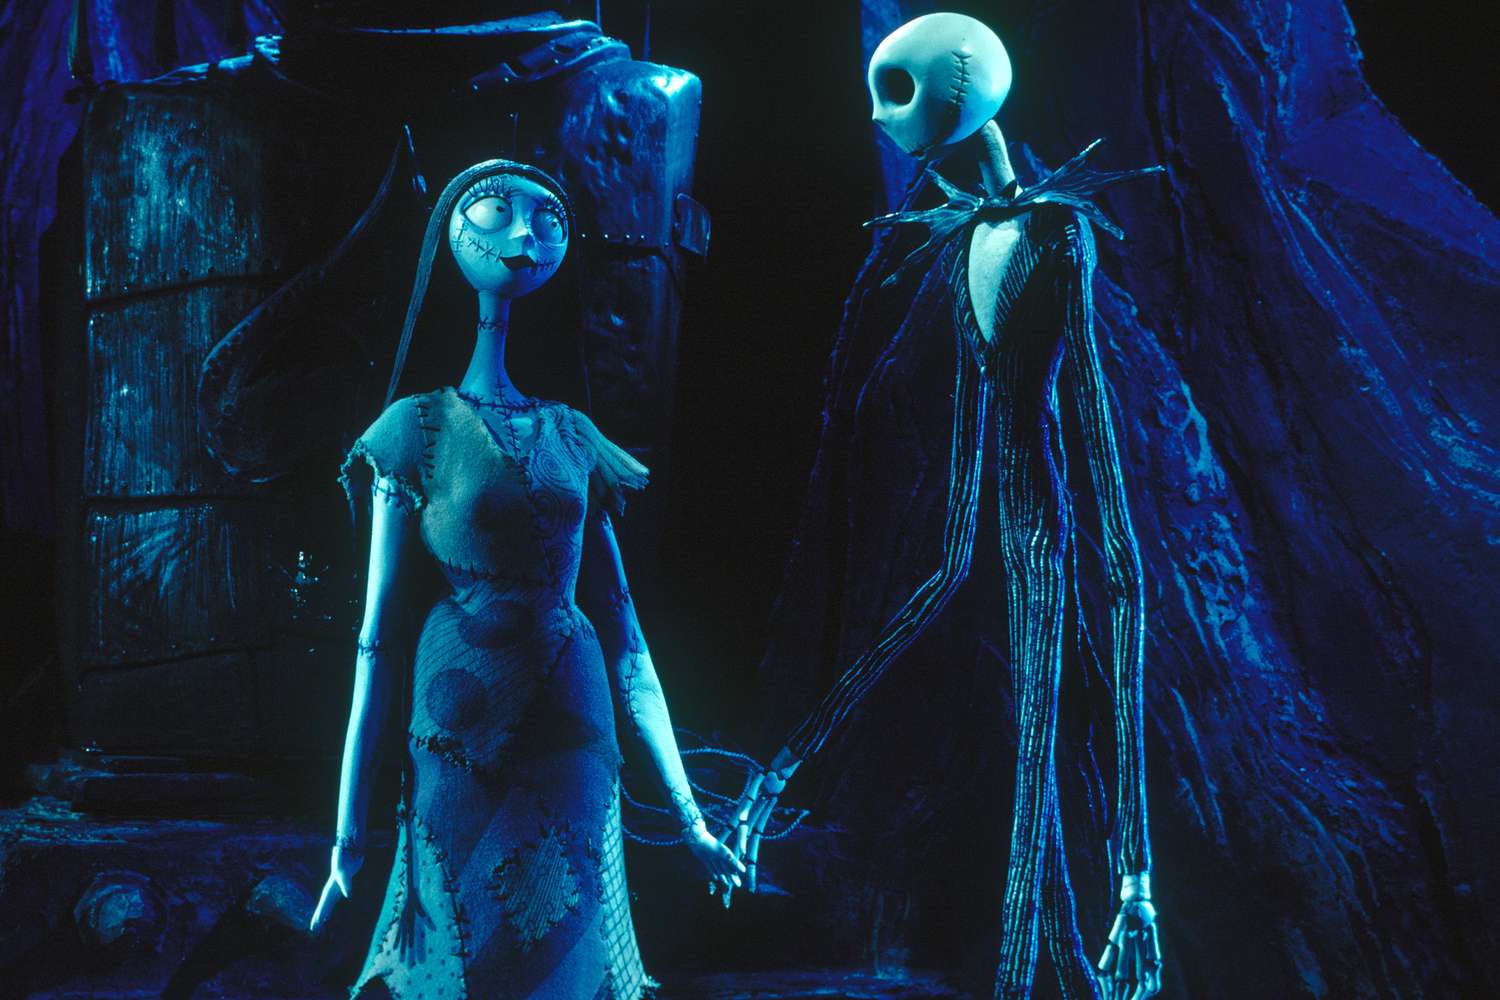 On the set of The Nightmare Before Christmas, a stop motion musical fantasy film written and produced by Tim Burton and directed by Henry Selick.